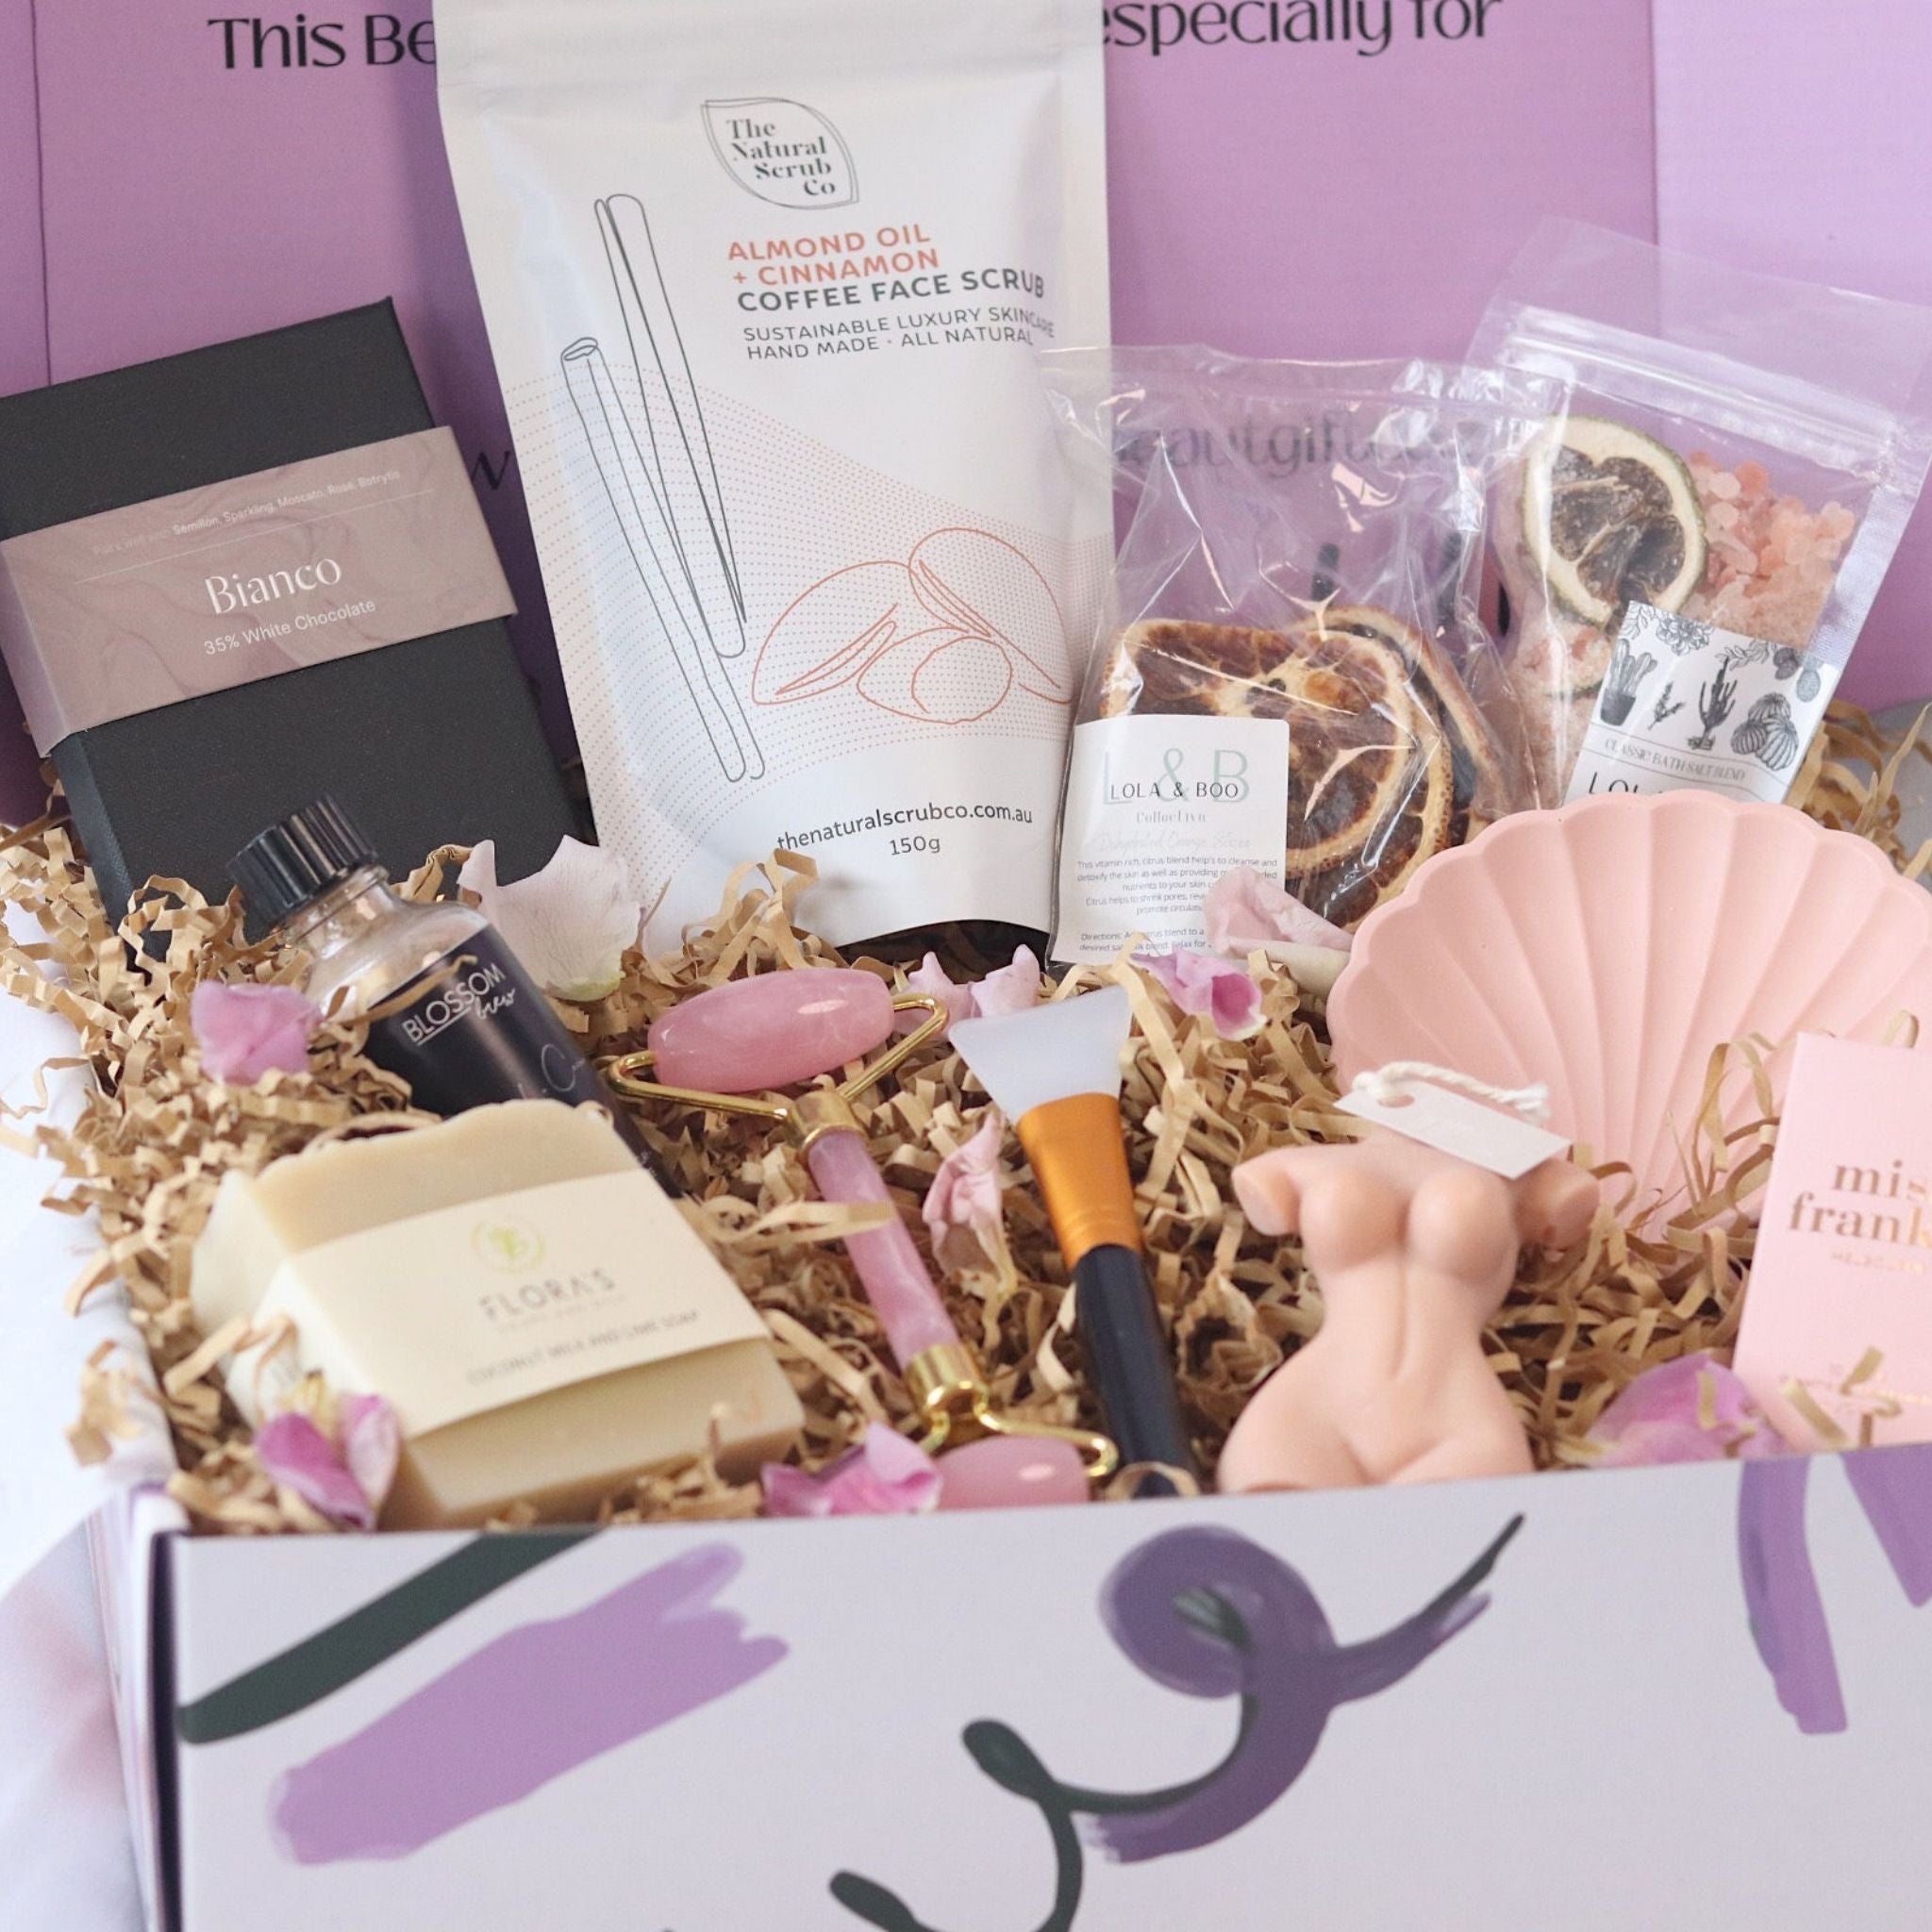 the ultimate gift for women. features all kinds of pamper items and sweet treats